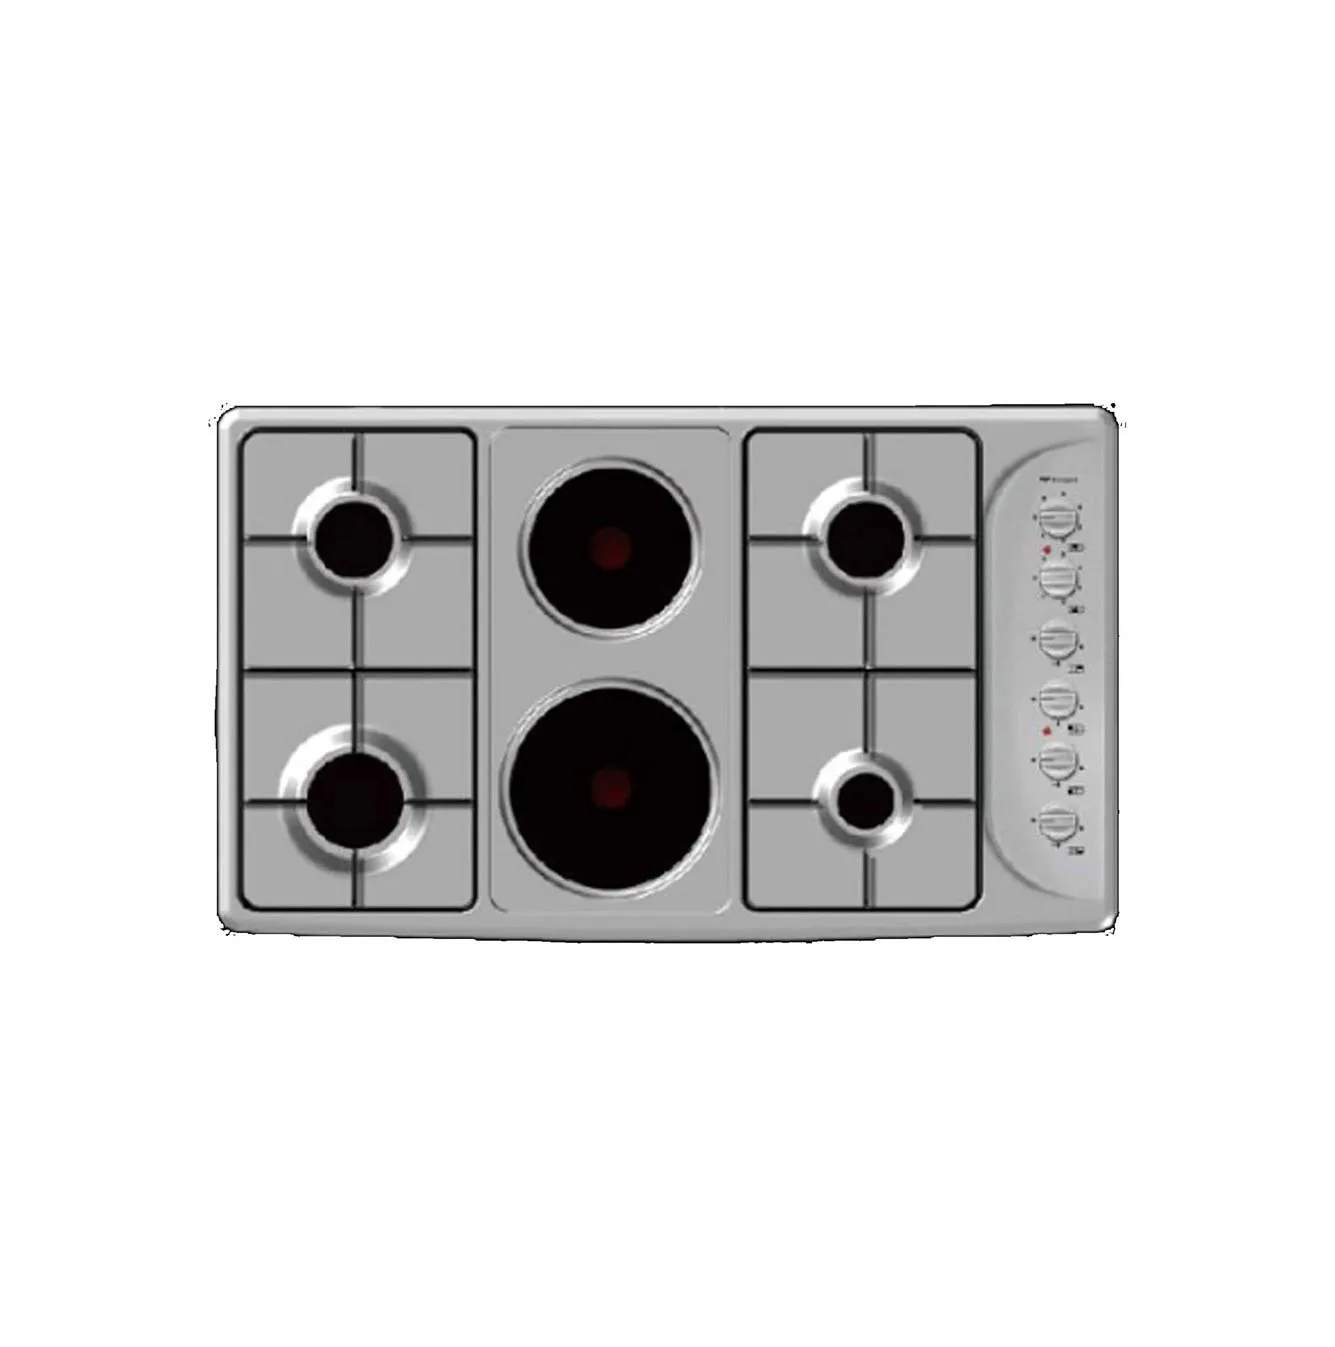 Bompani 90cm Built-In 4 Gas And 2 Electric Hob Stainless Steel Model BO293GNL | 1 Year Warranty